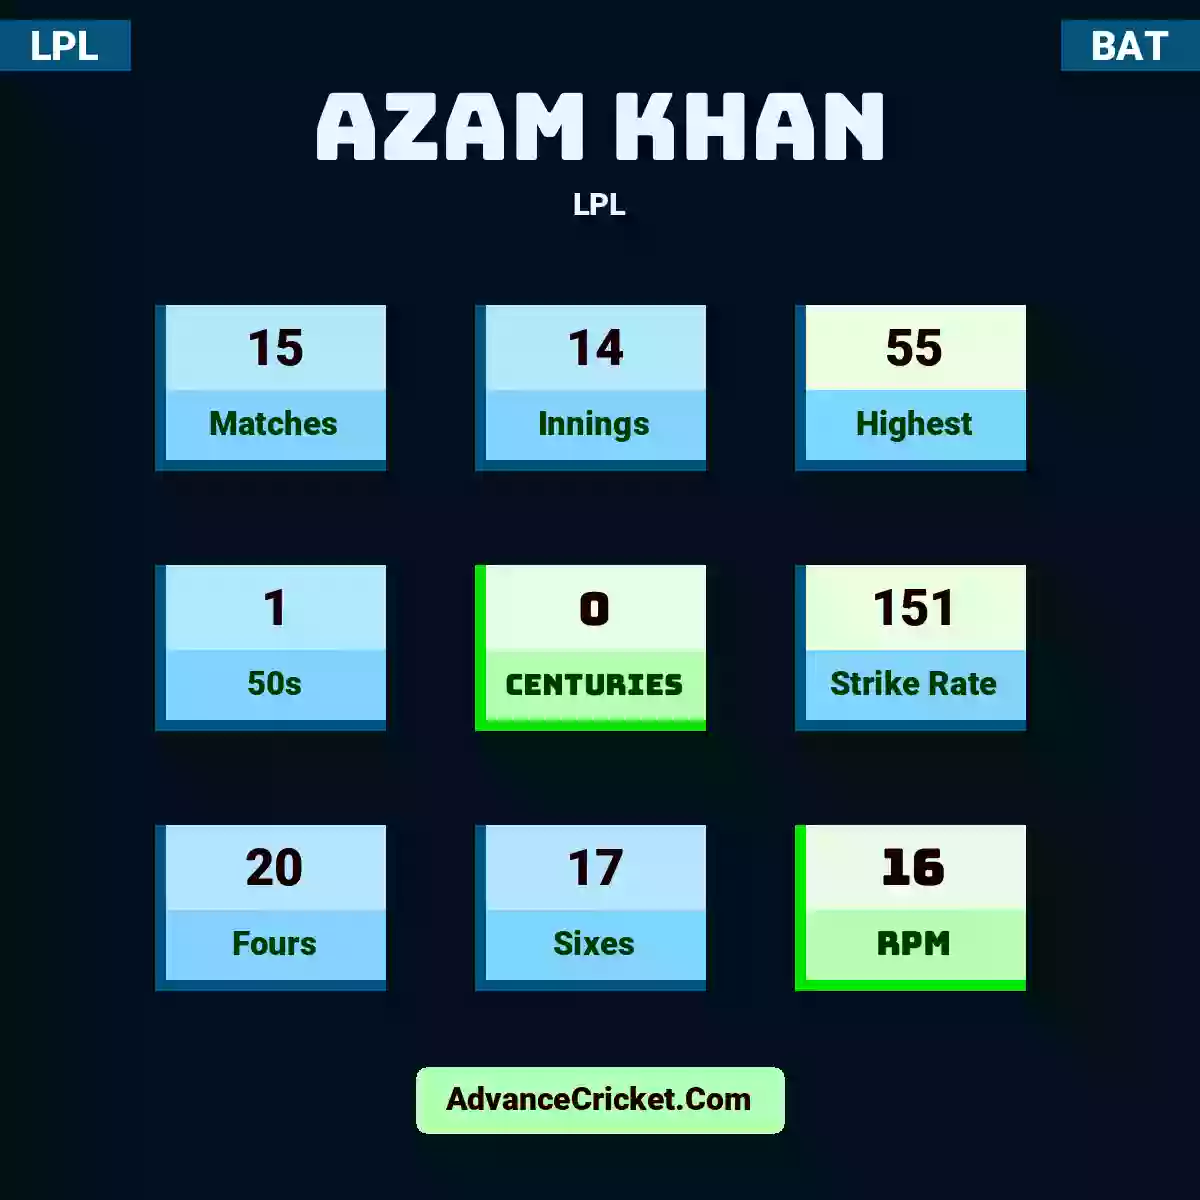 Azam Khan LPL , Azam Khan played 15 matches, scored 55 runs as highest, 1 half-centuries, and 0 centuries, with a strike rate of 151. A.Khan hit 20 fours and 17 sixes, with an RPM of 16.